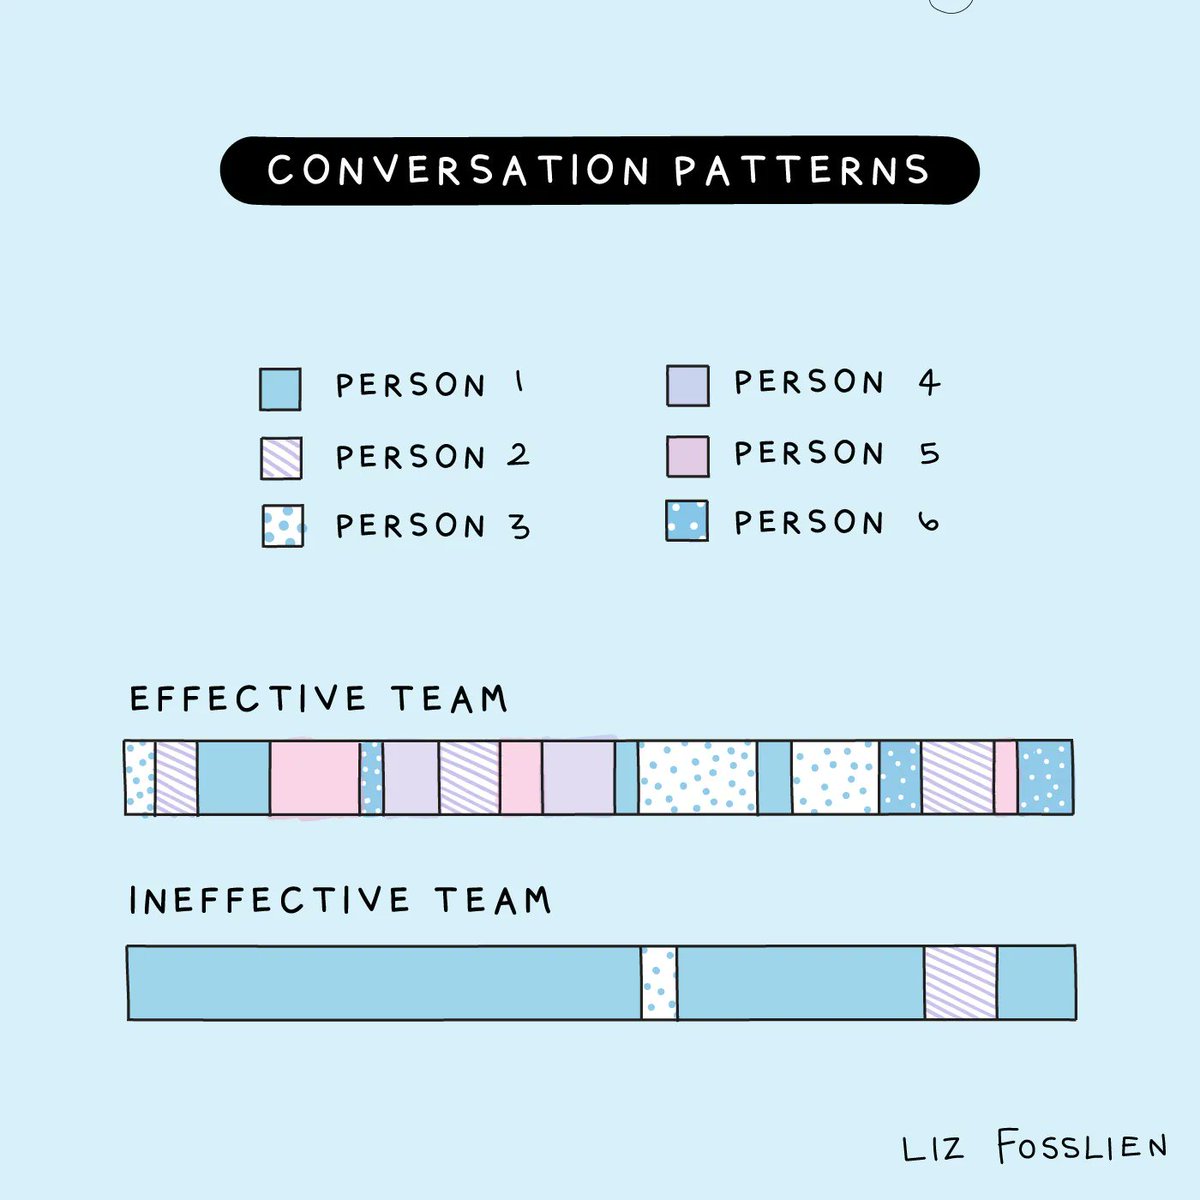 Great illustration by @lizandmollie 👏

What else can contribute to an effective team?

#Conversation #TurnTaking #PsychologicalSafety